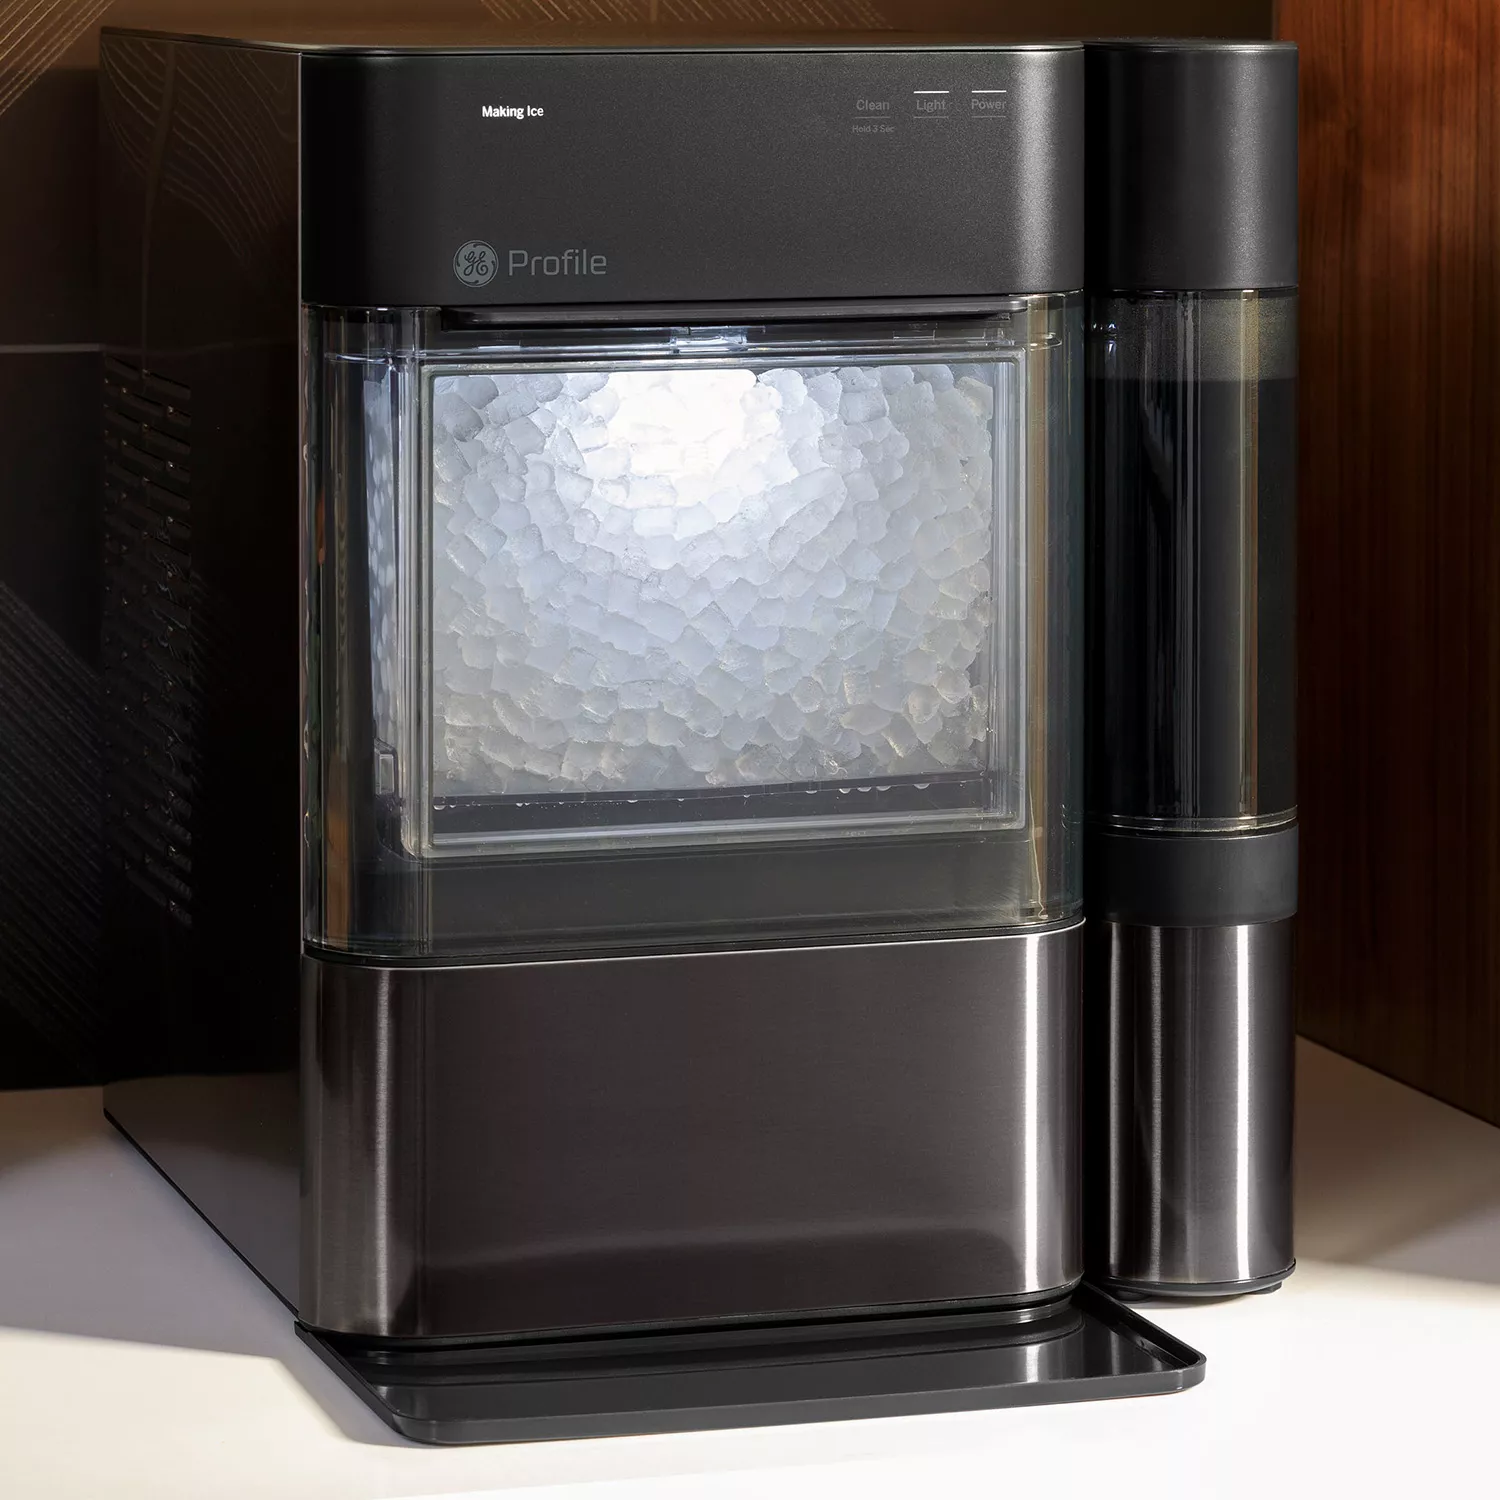 GE Profile Opal Nugget Ice Maker Review: Elevates Your Home Bar